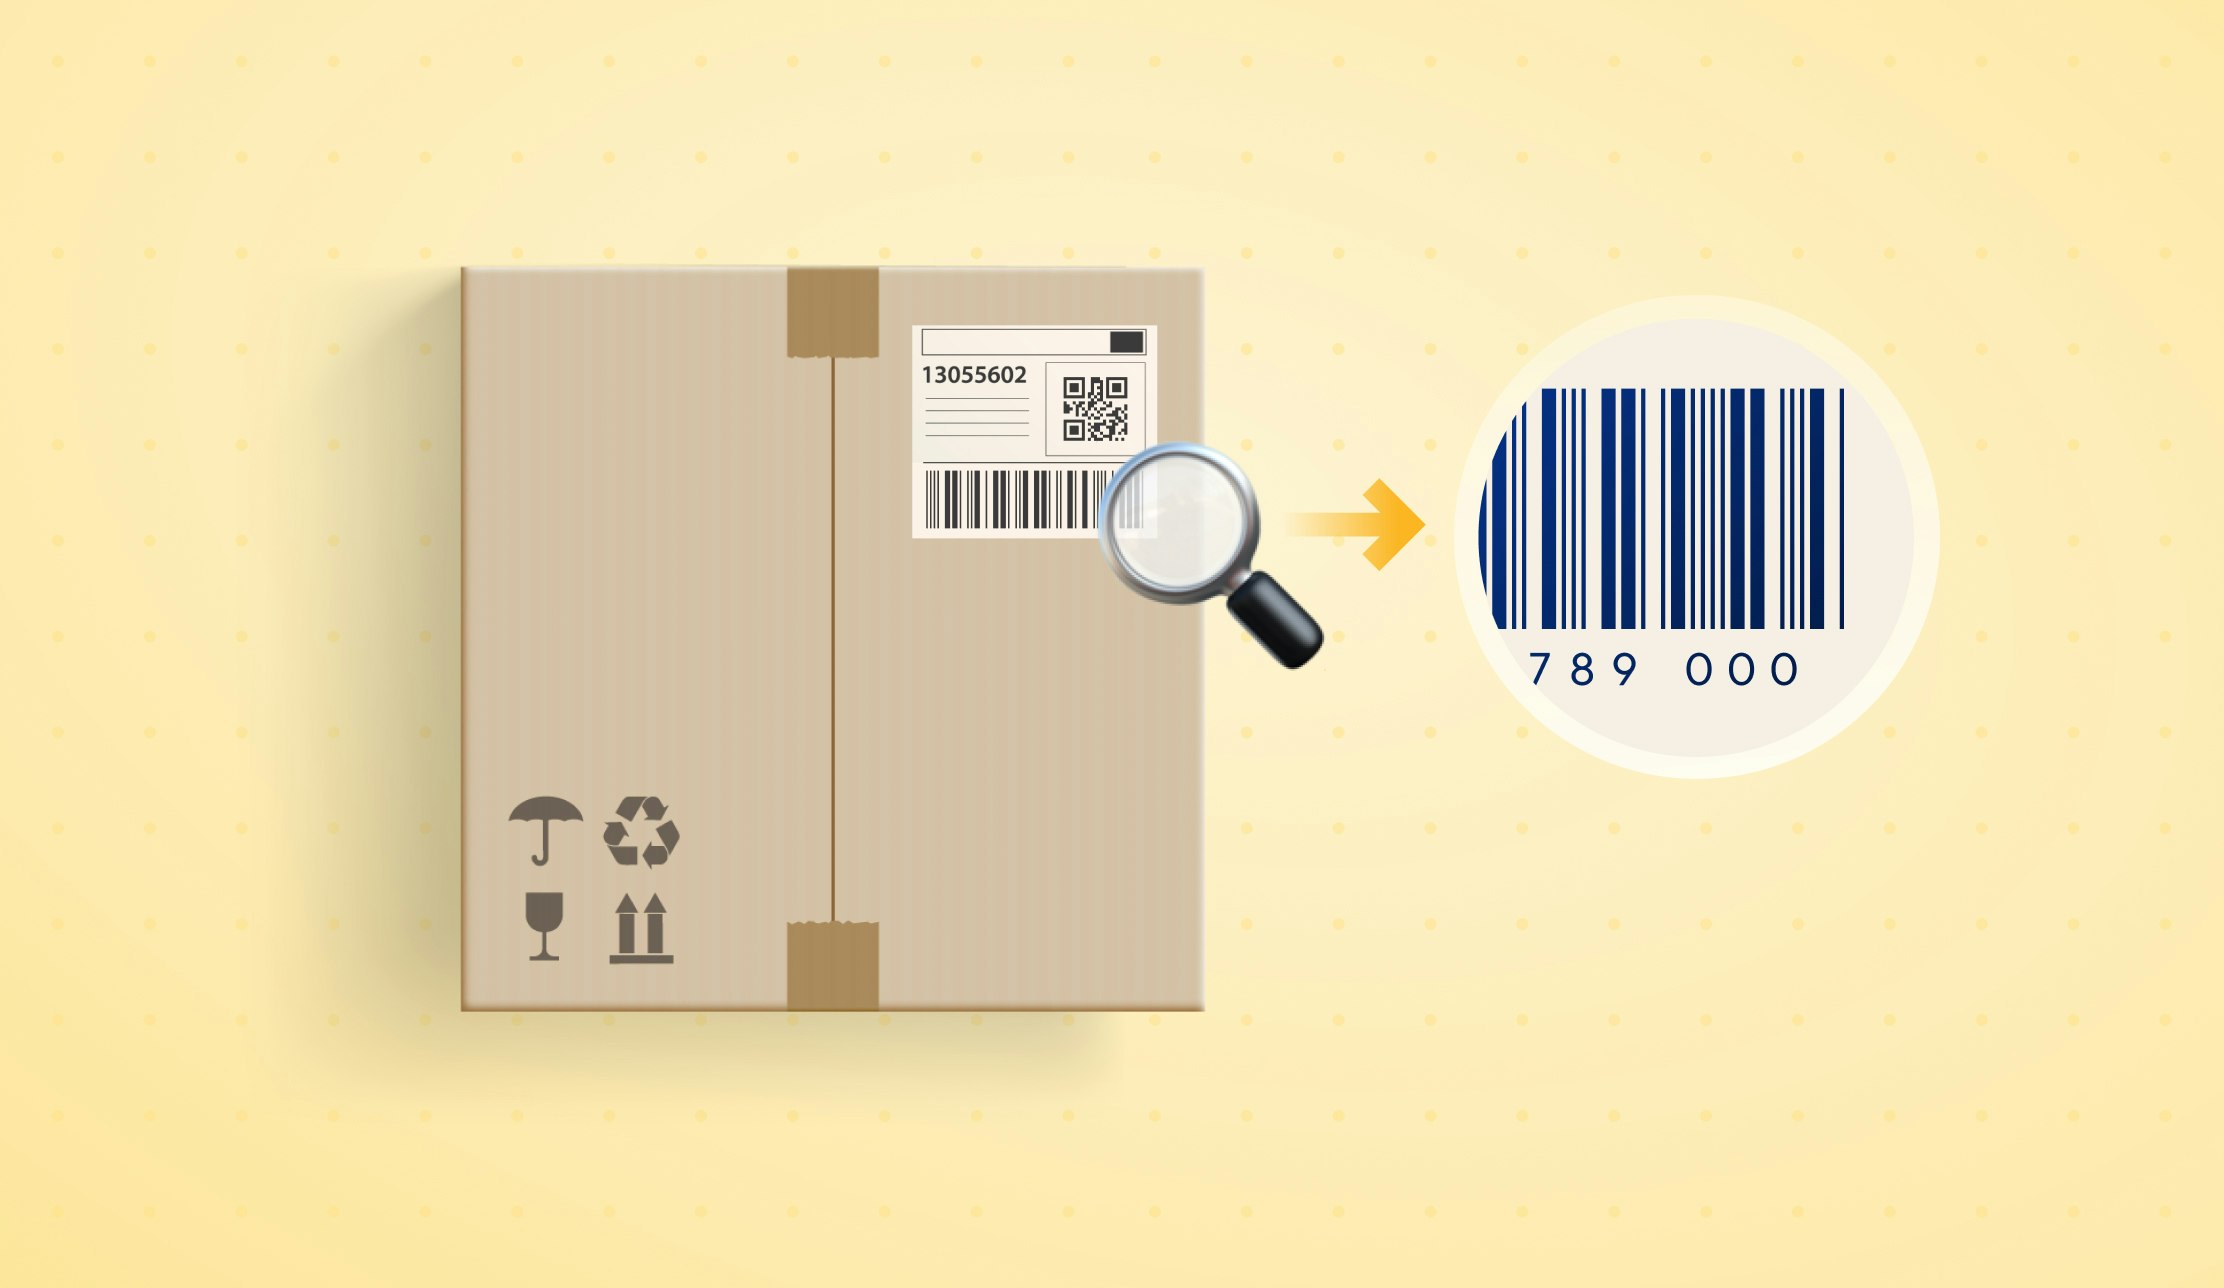 barcode on package